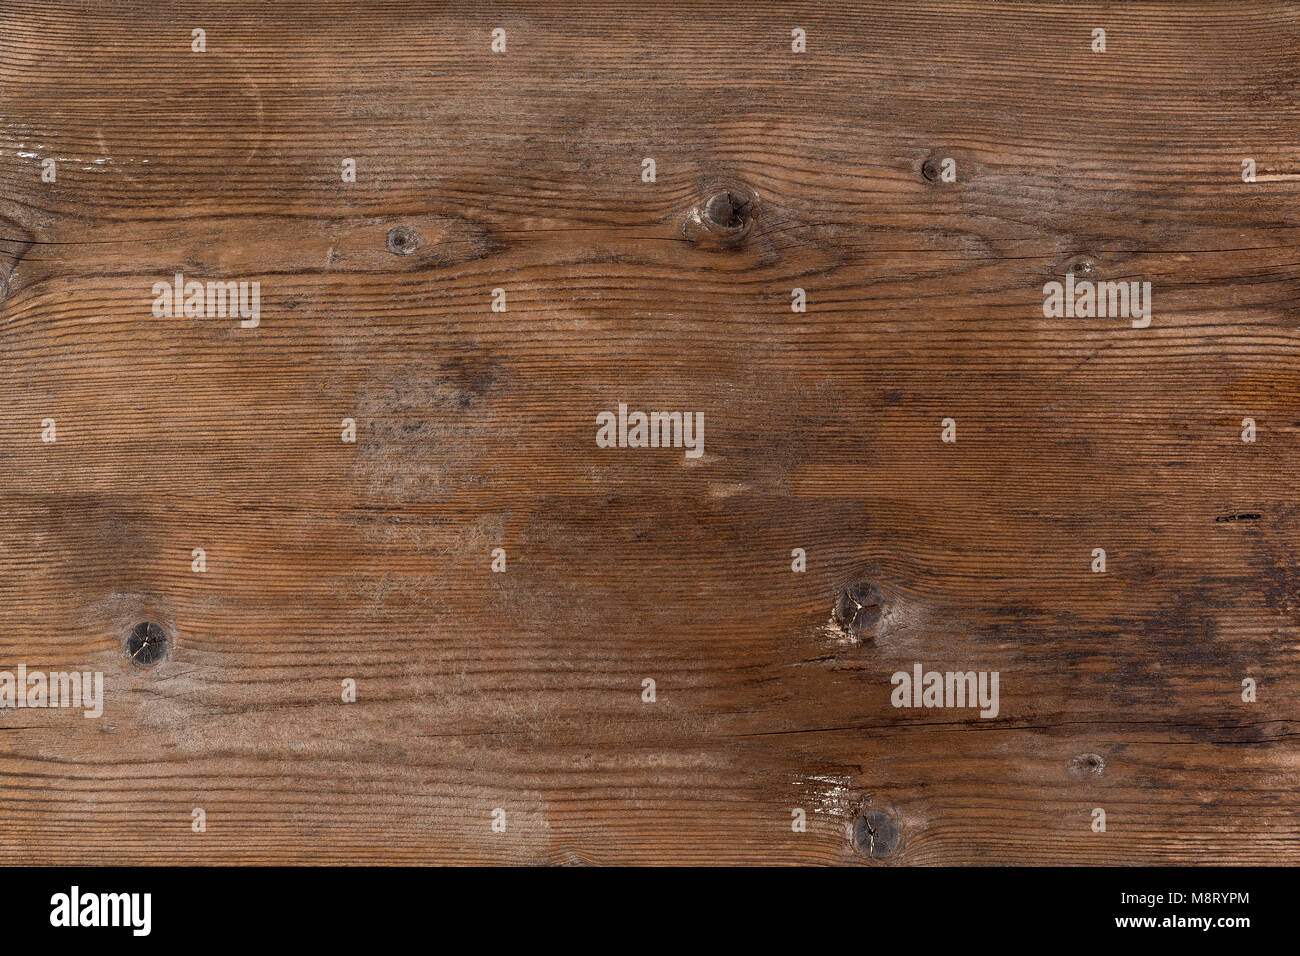 Old rural wooden piece of wood brown colors, detailed plank photo texture Stock Photo